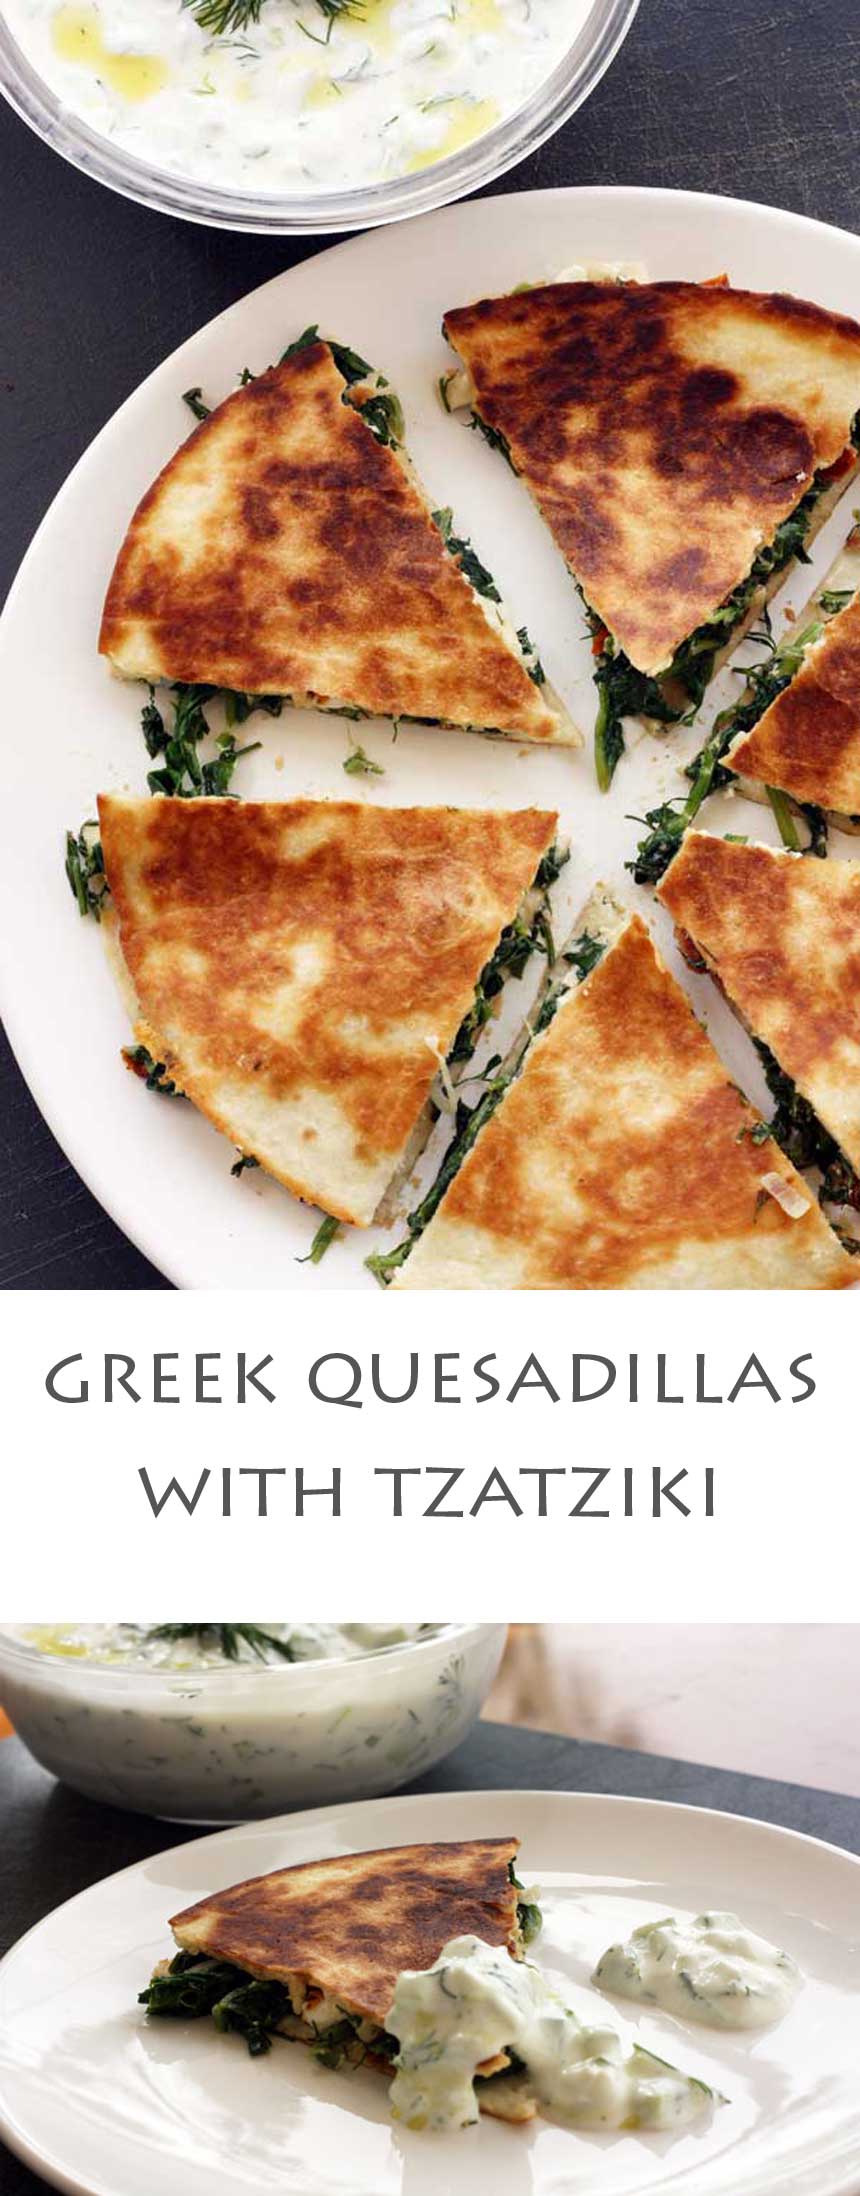 Pin image showing Greek quesadillas on a plate from above.